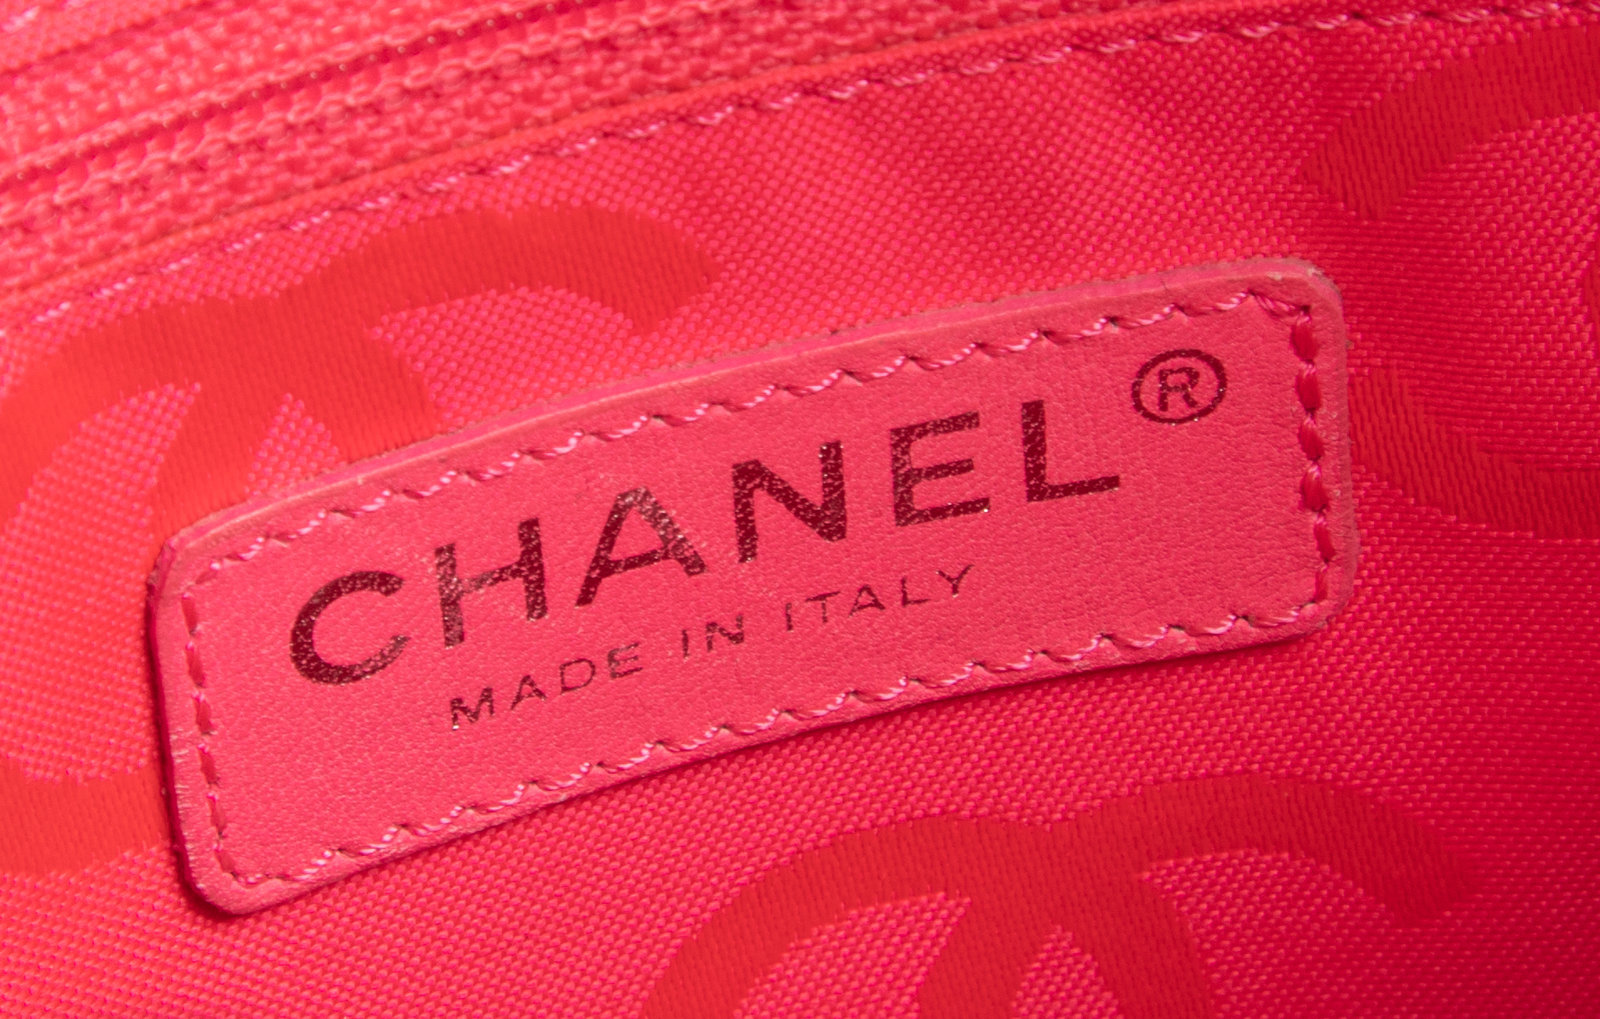 CHANEL Pink & Black Quilted Calfskin Leather Small Cambon CC Logo Bag C.2004 -2005